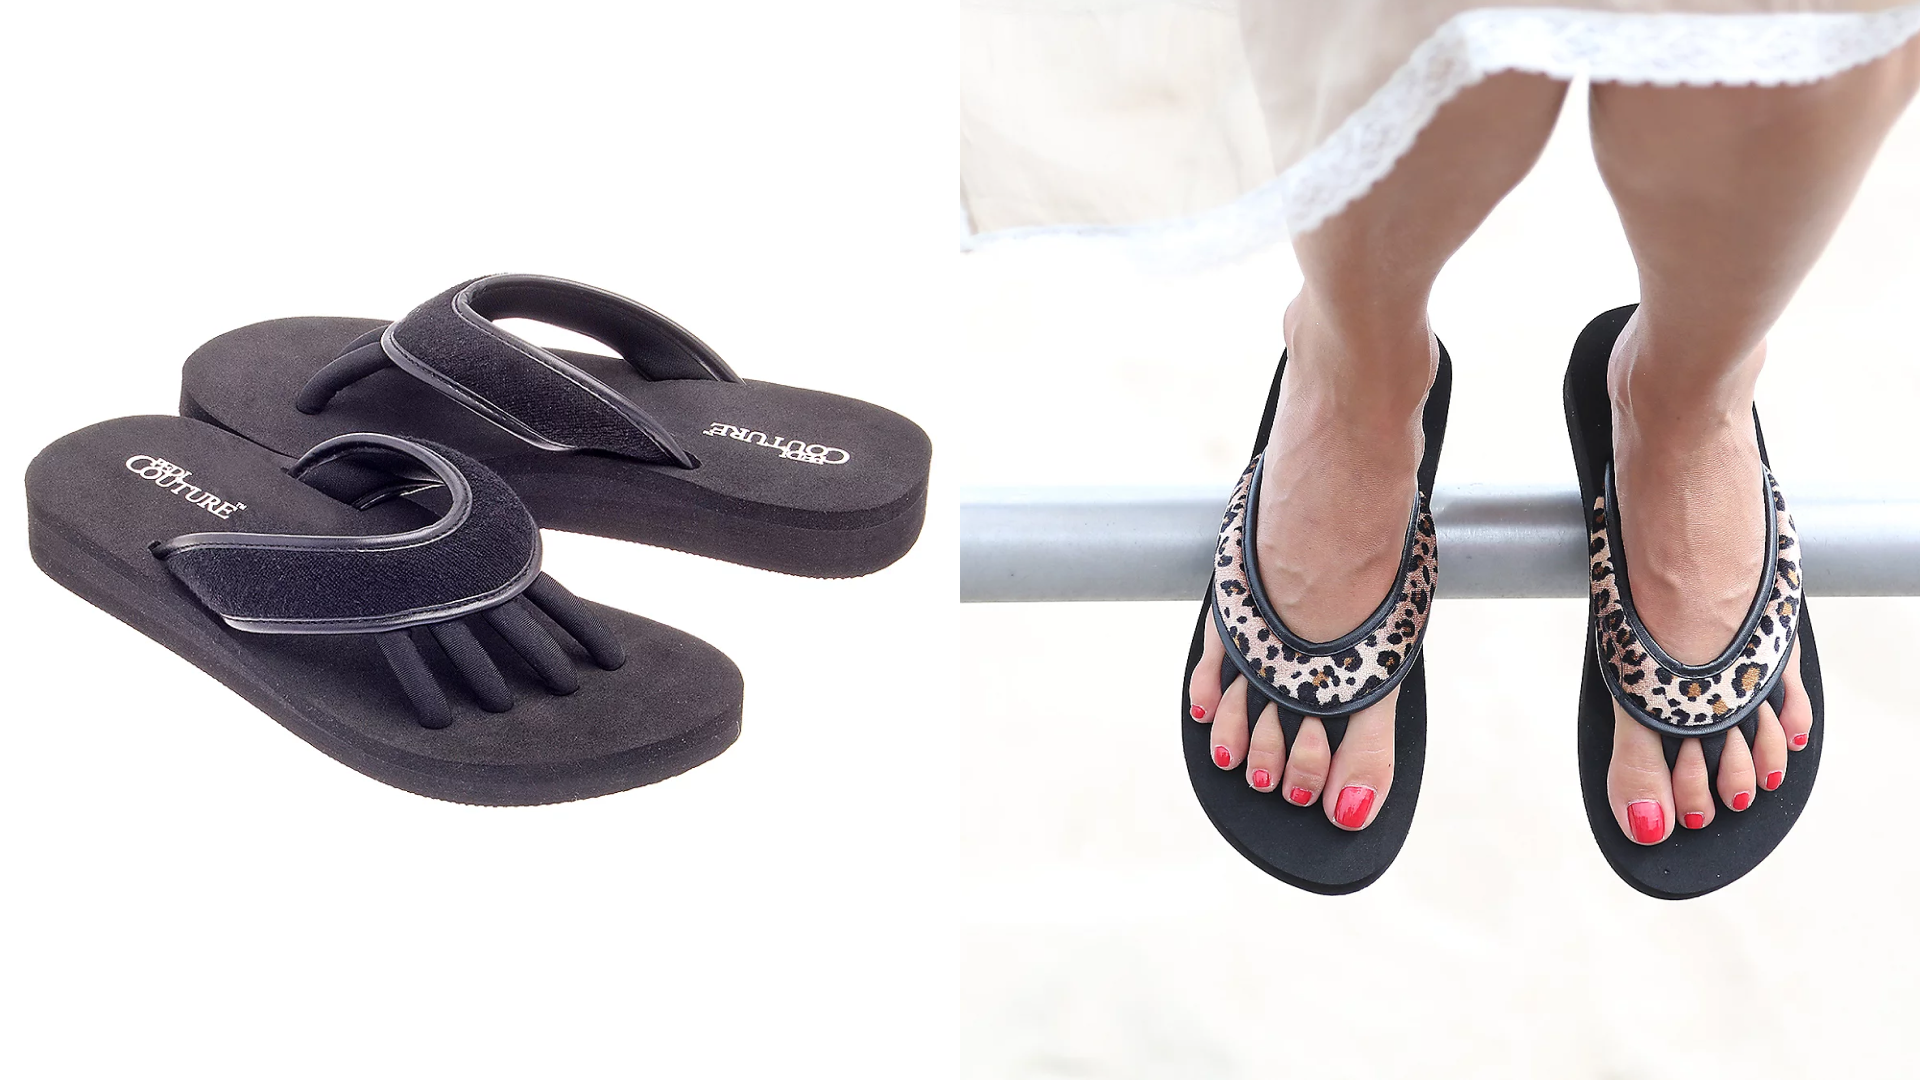 Sandals to keep your cute nails clean